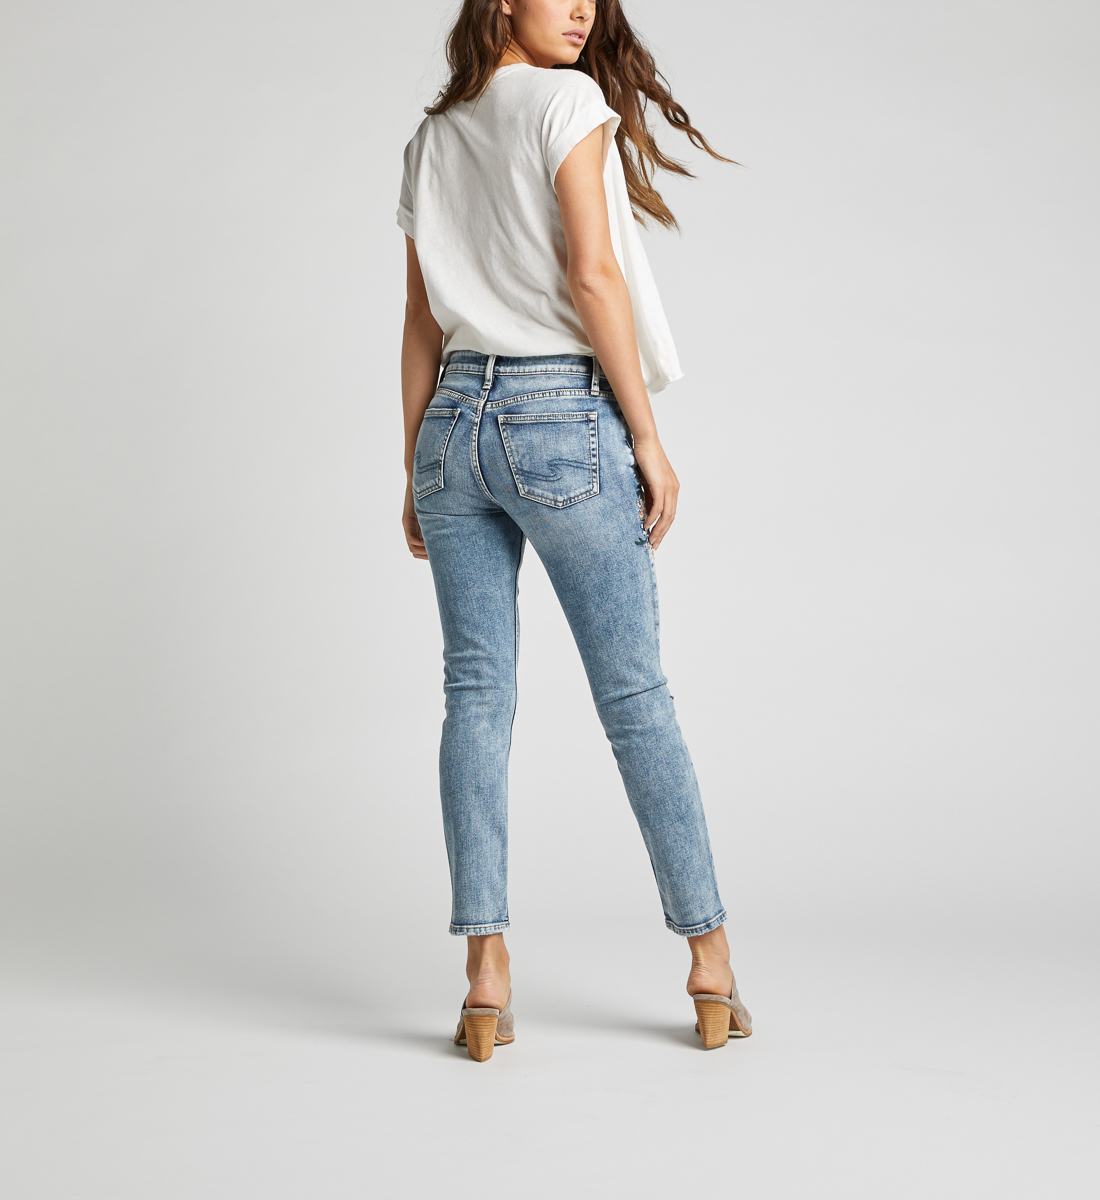 Avery High Rise Slim Leg Jeans - Silver Jeans US